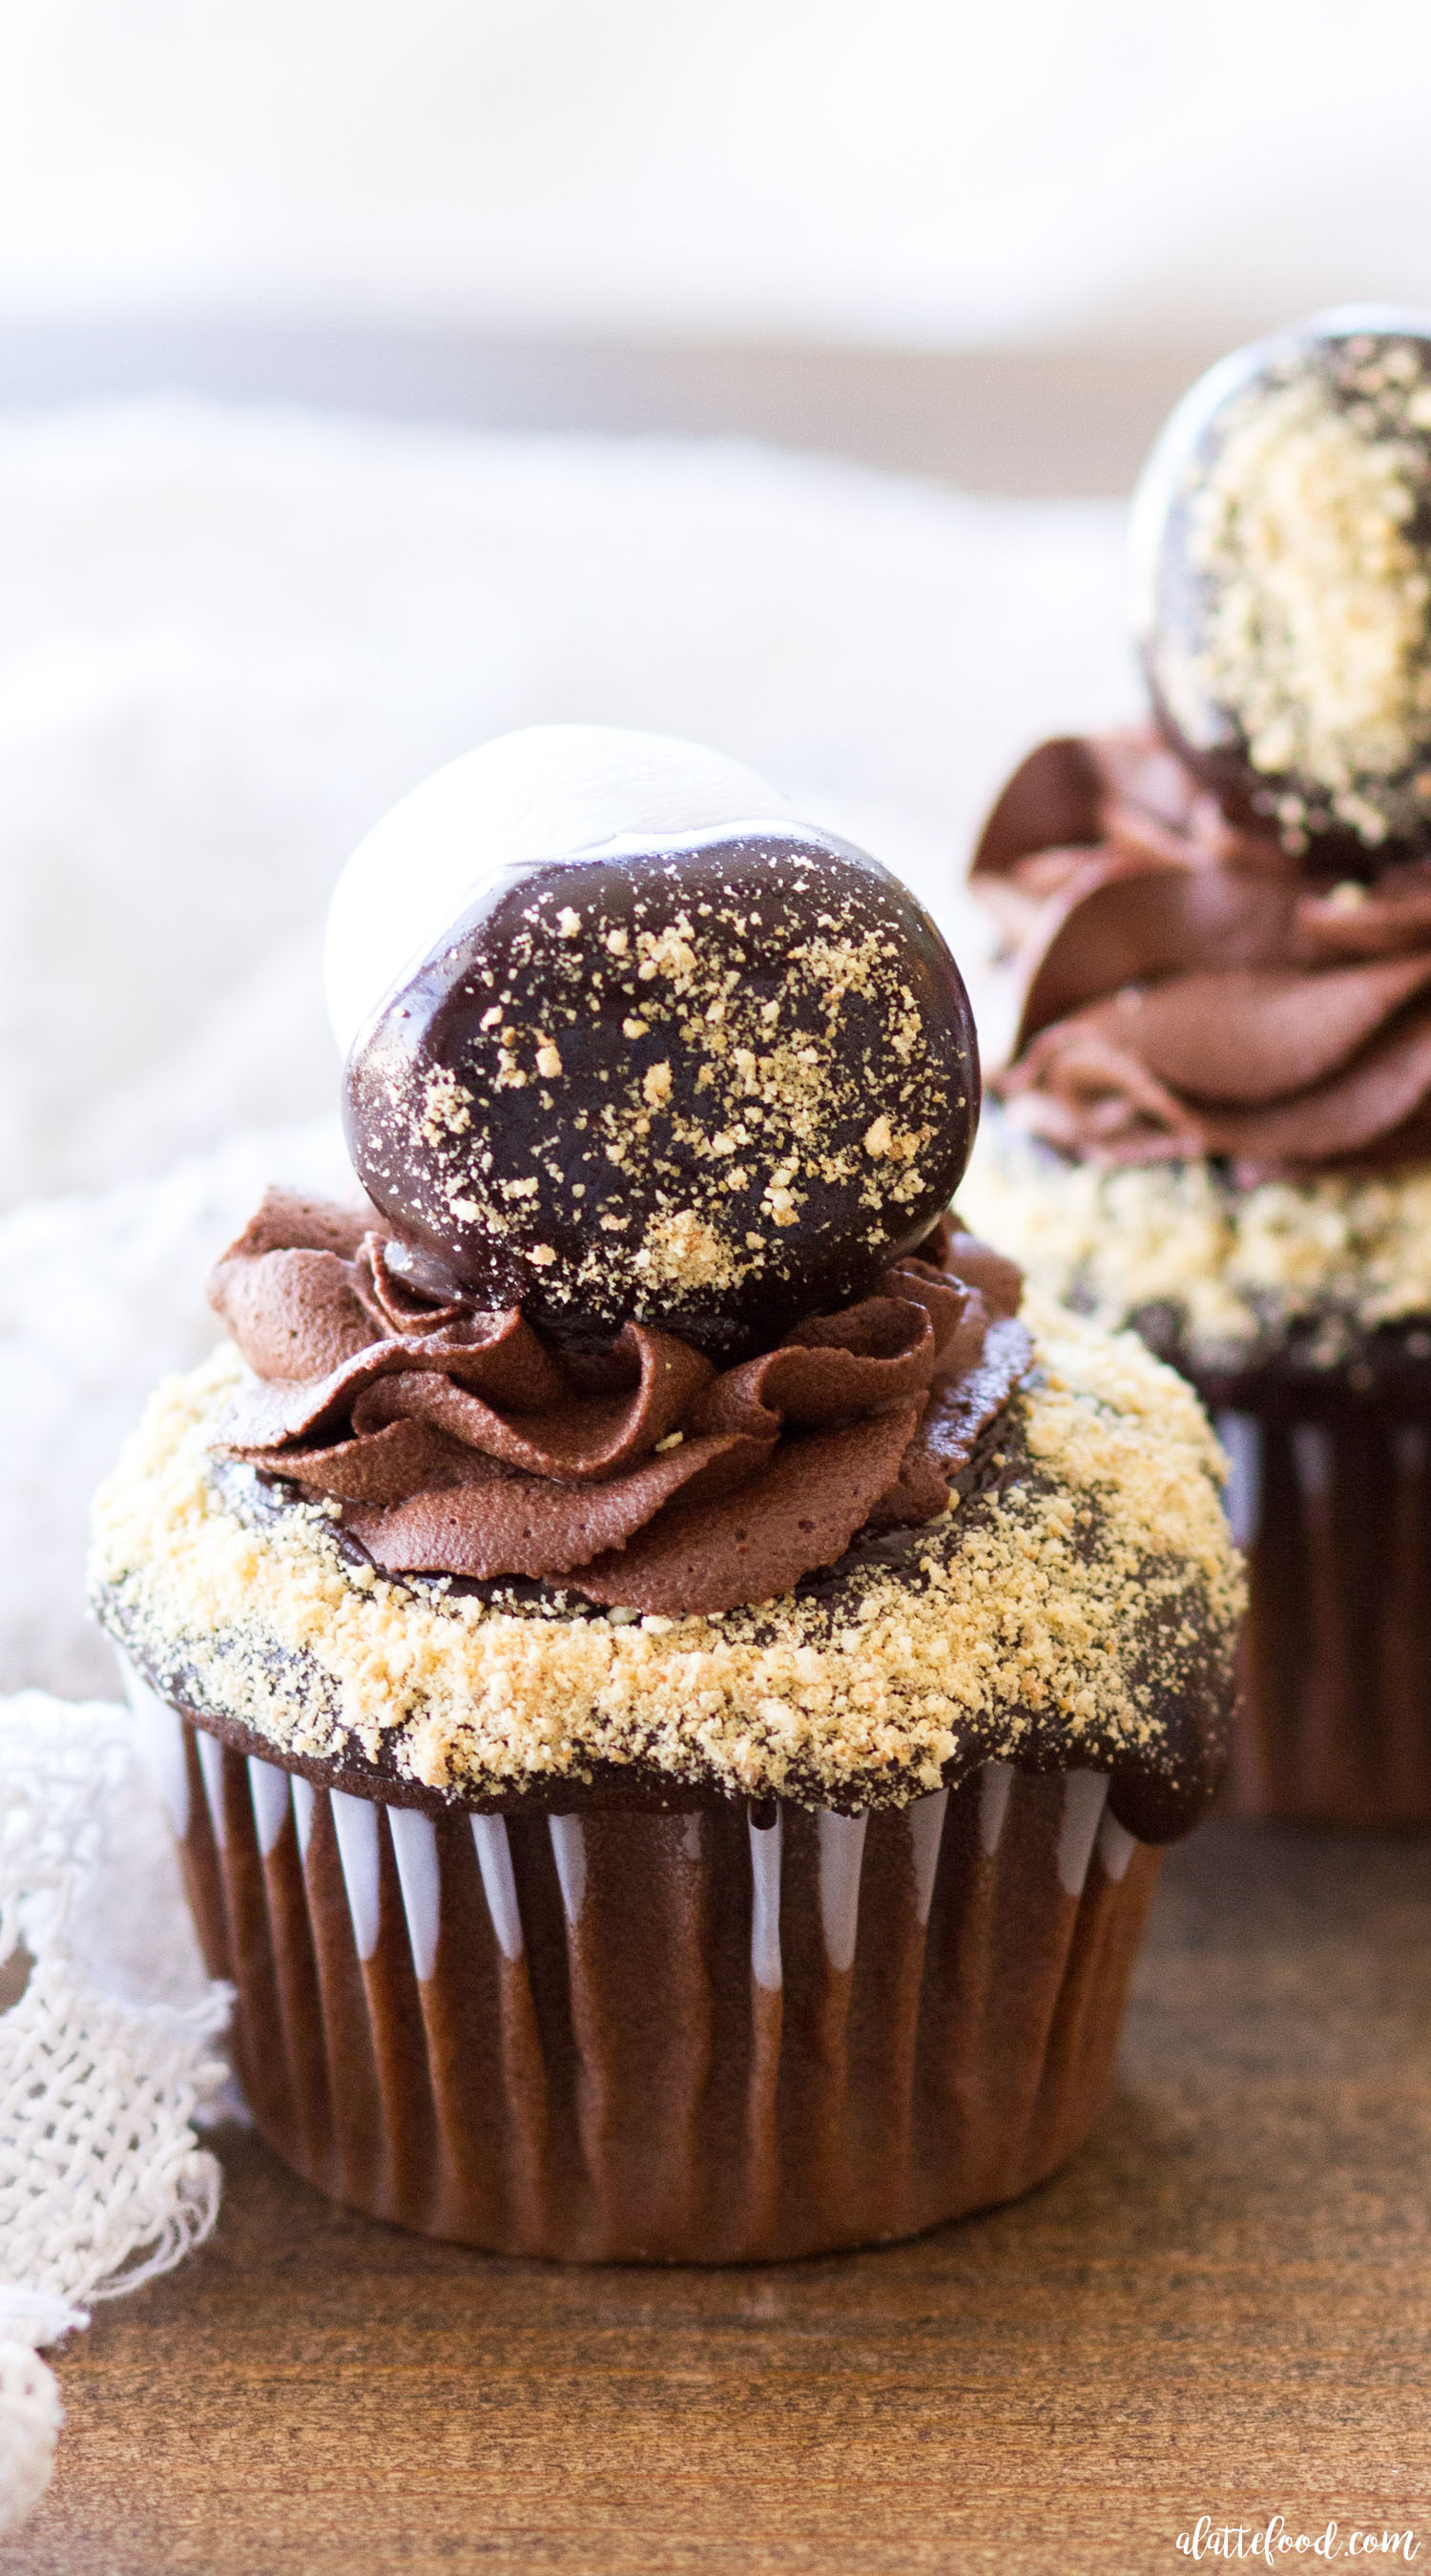 Chocolate S'mores Cupcakes with Whipped Ganache Frosting (Video)